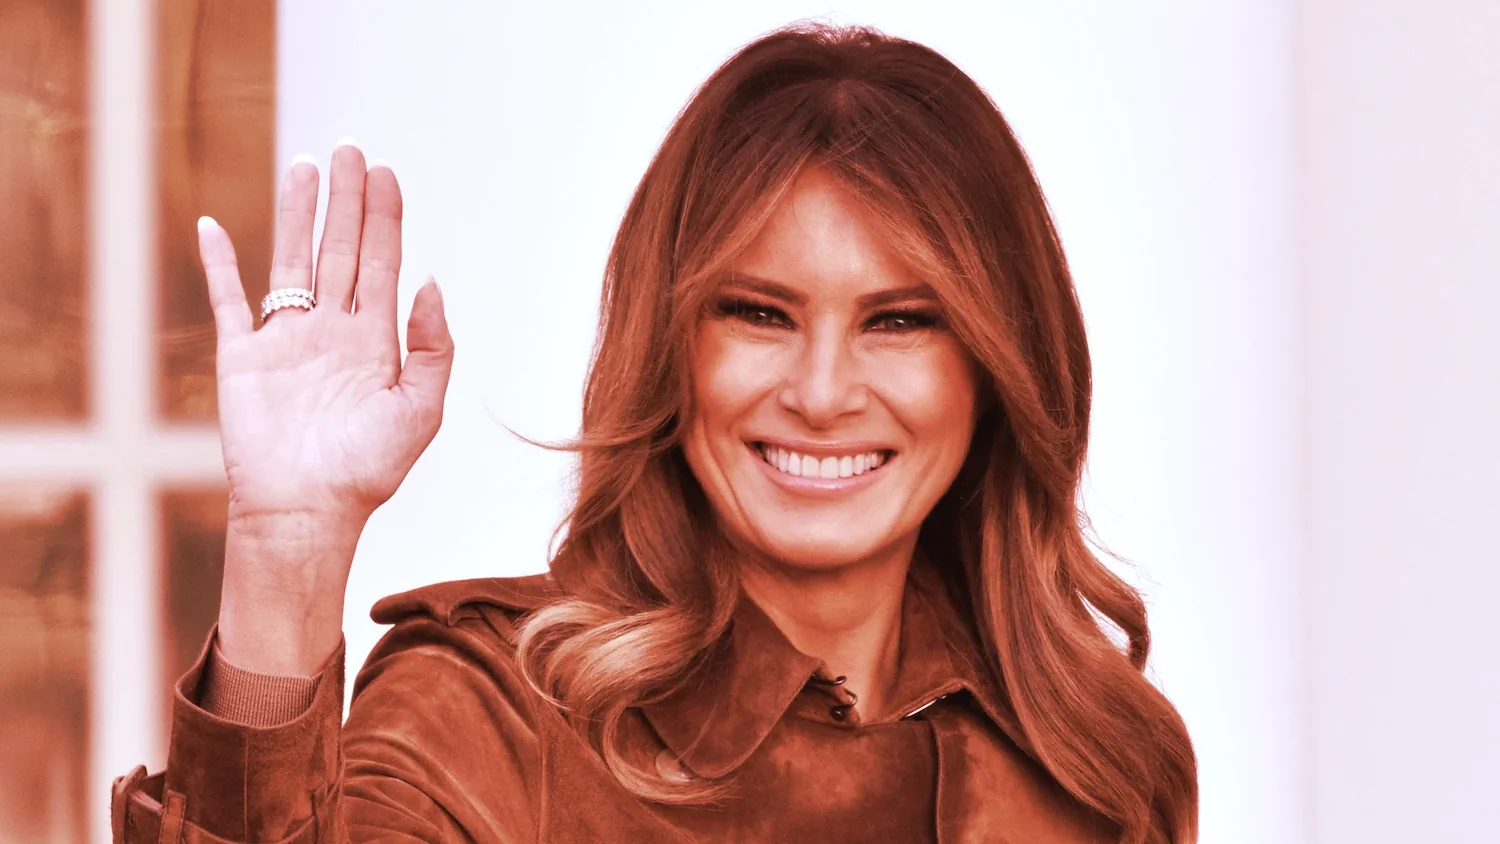 Solana Labs says it didn't bring Melania Trump's NFT project to its platform. Image: Shutterstock